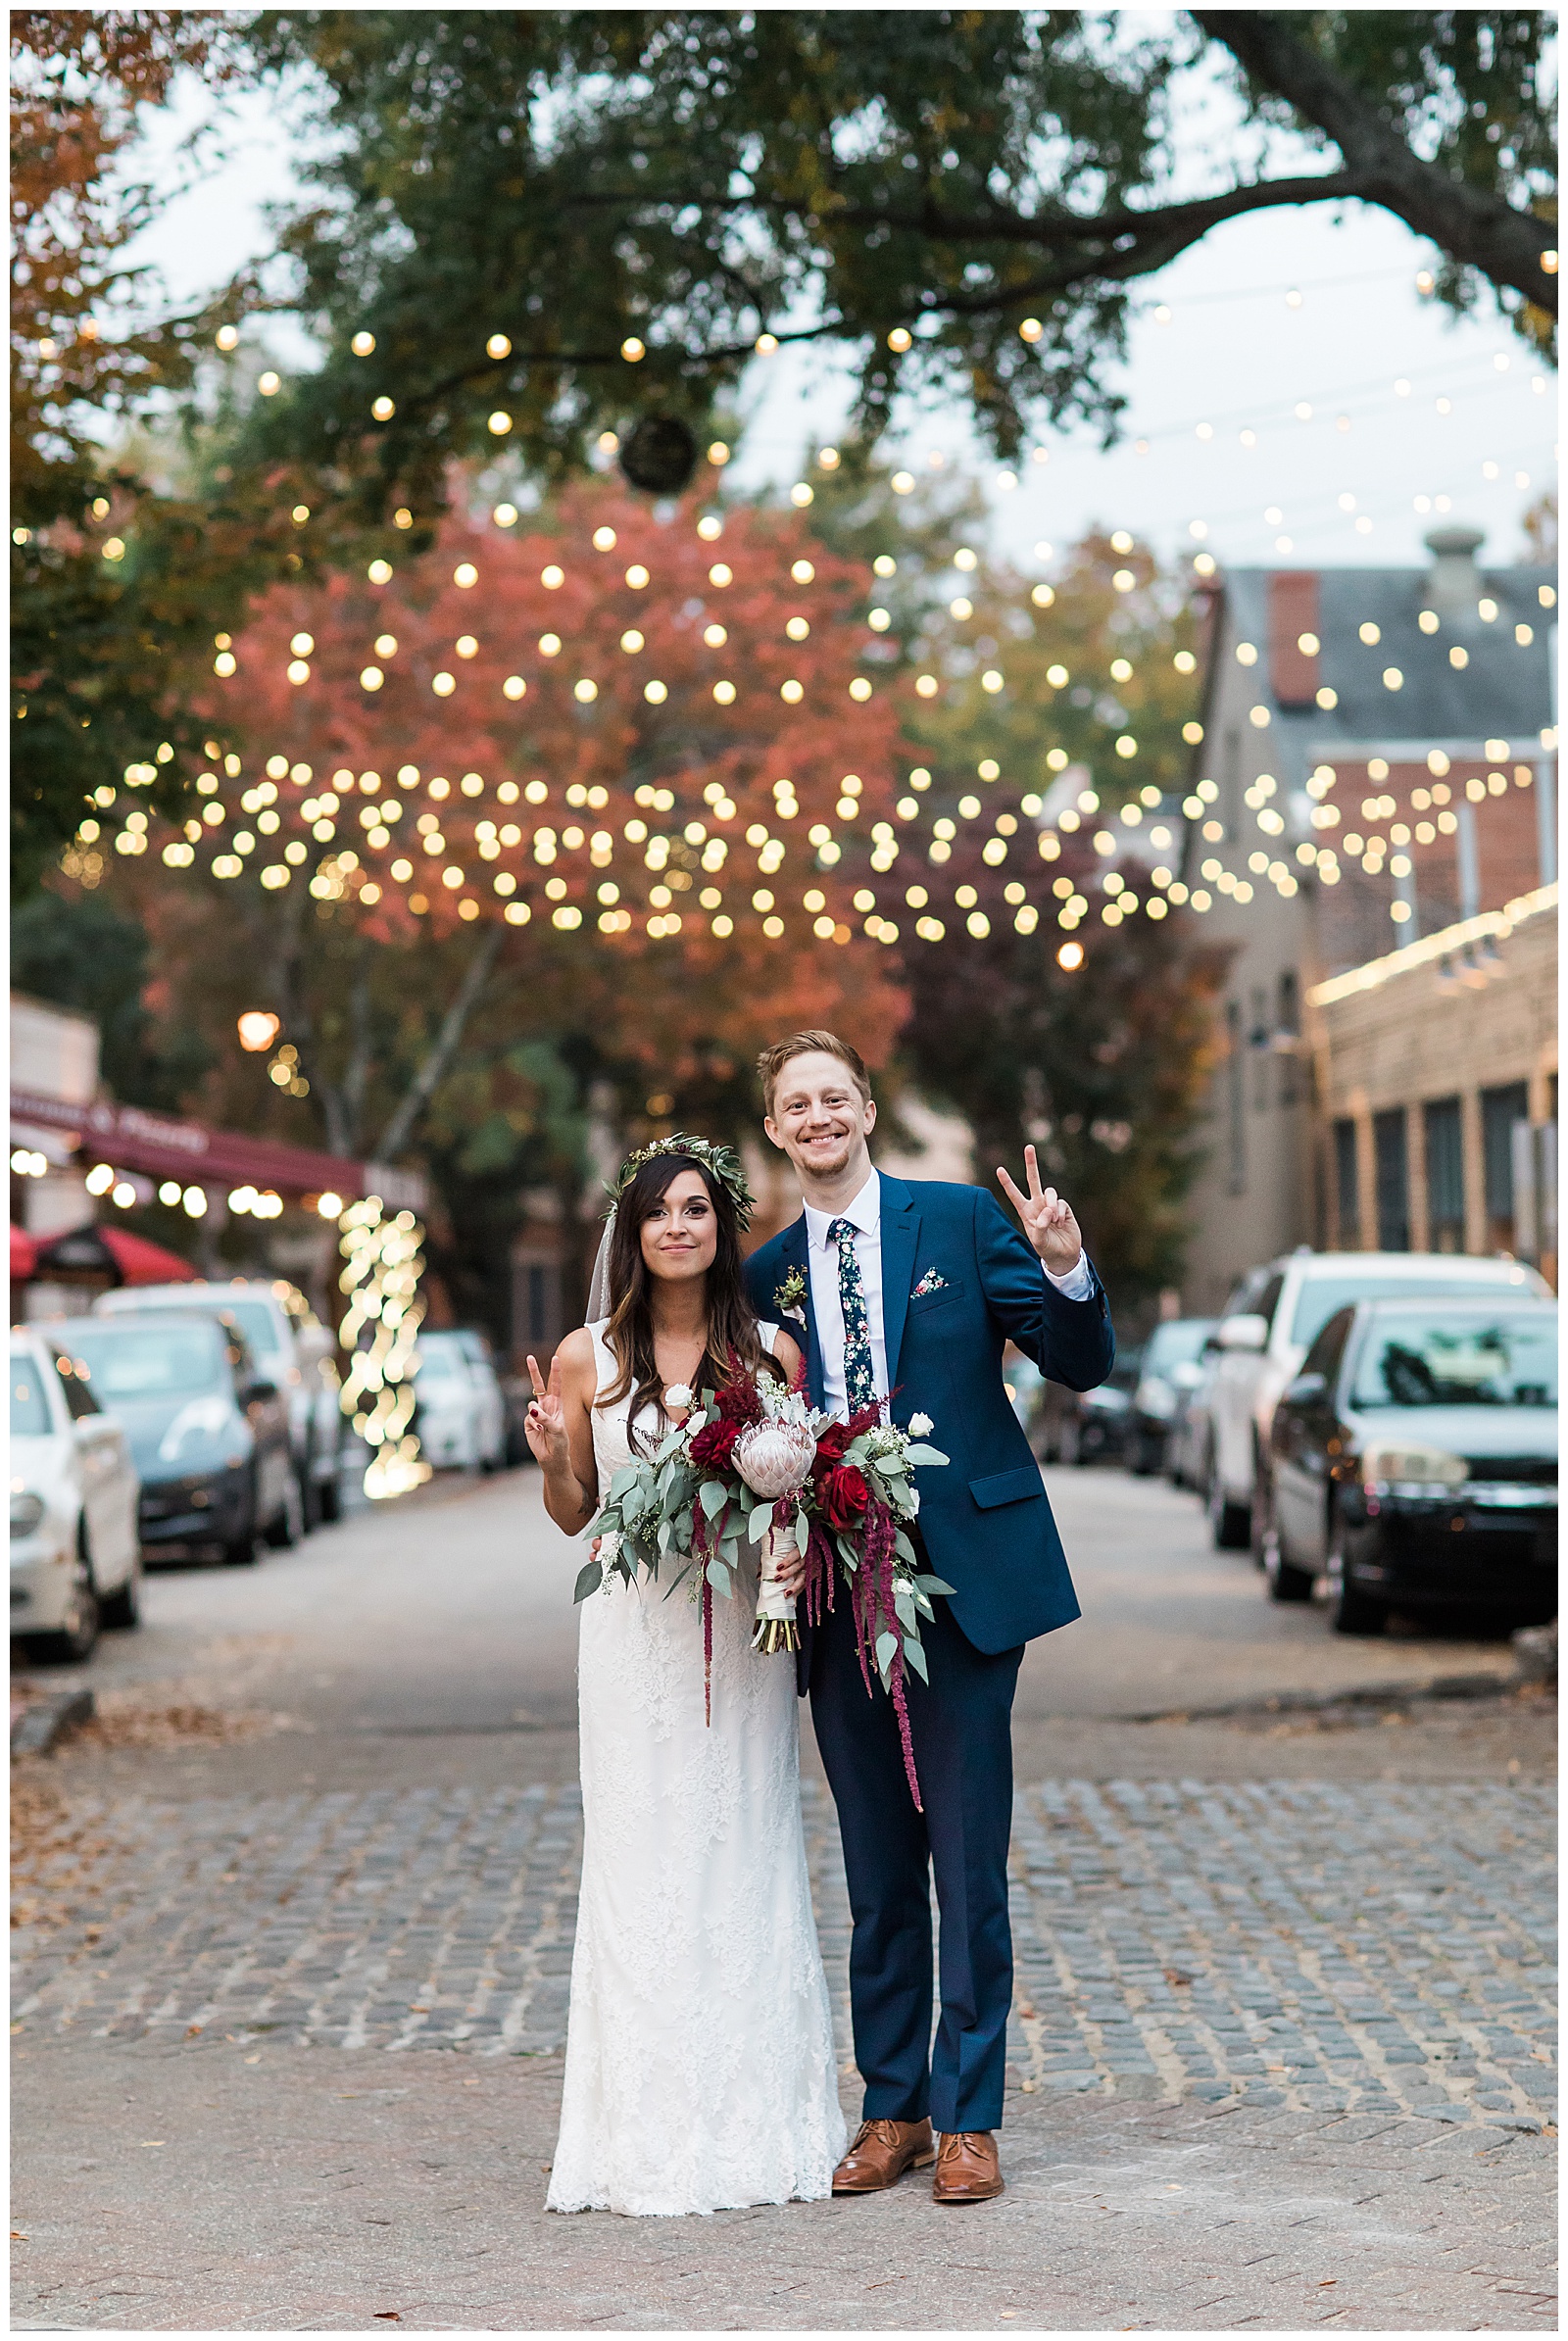 A dark haired woman in a white wedding gown stands beside a tall red headed gentleman in a blue suit outside of Market hall Raleigh while holding up the peace sign with their fingers